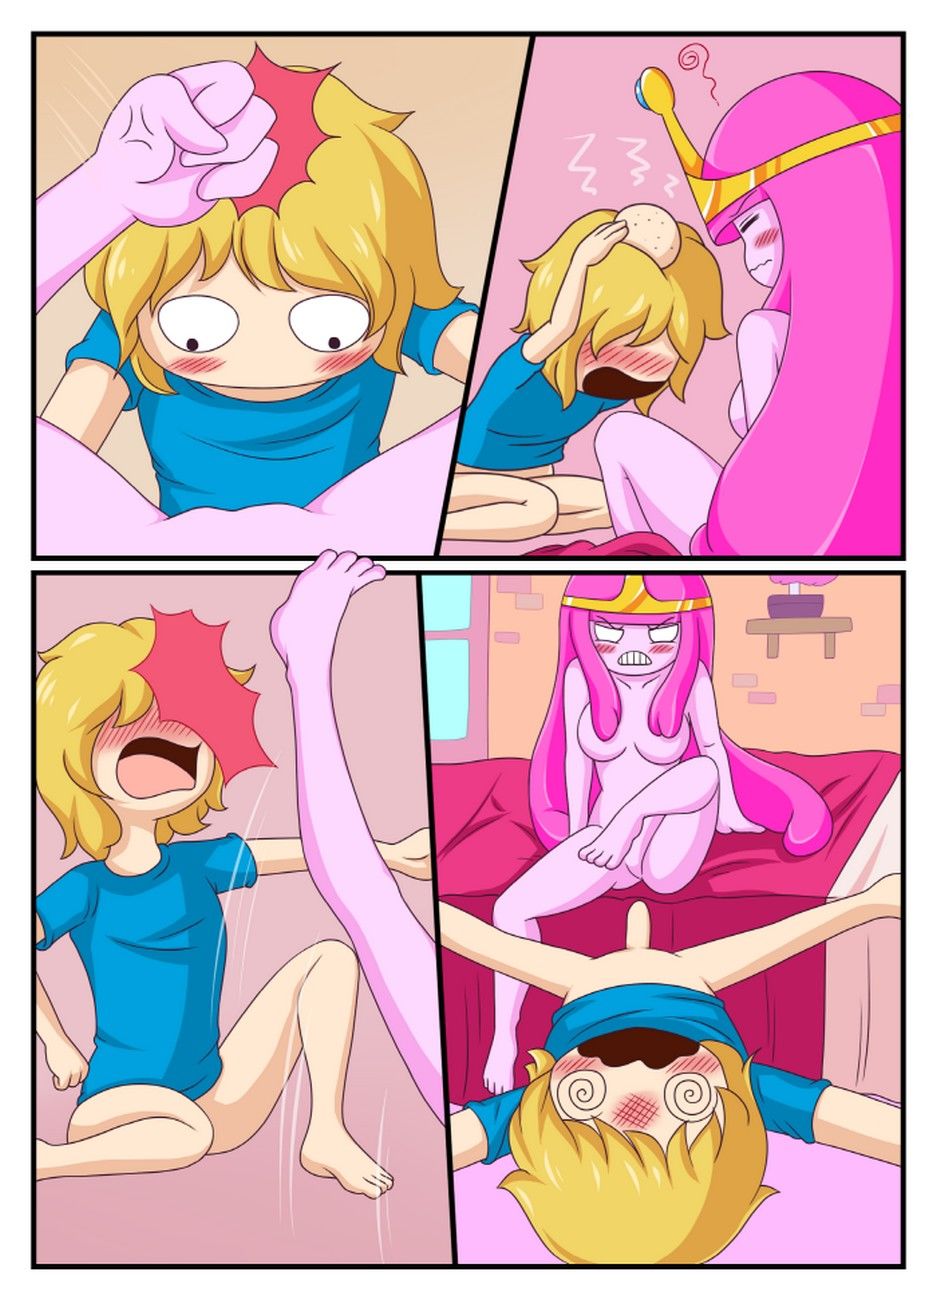 Adventure_Time_-_Adult_Time_1 comix_43486.jpg